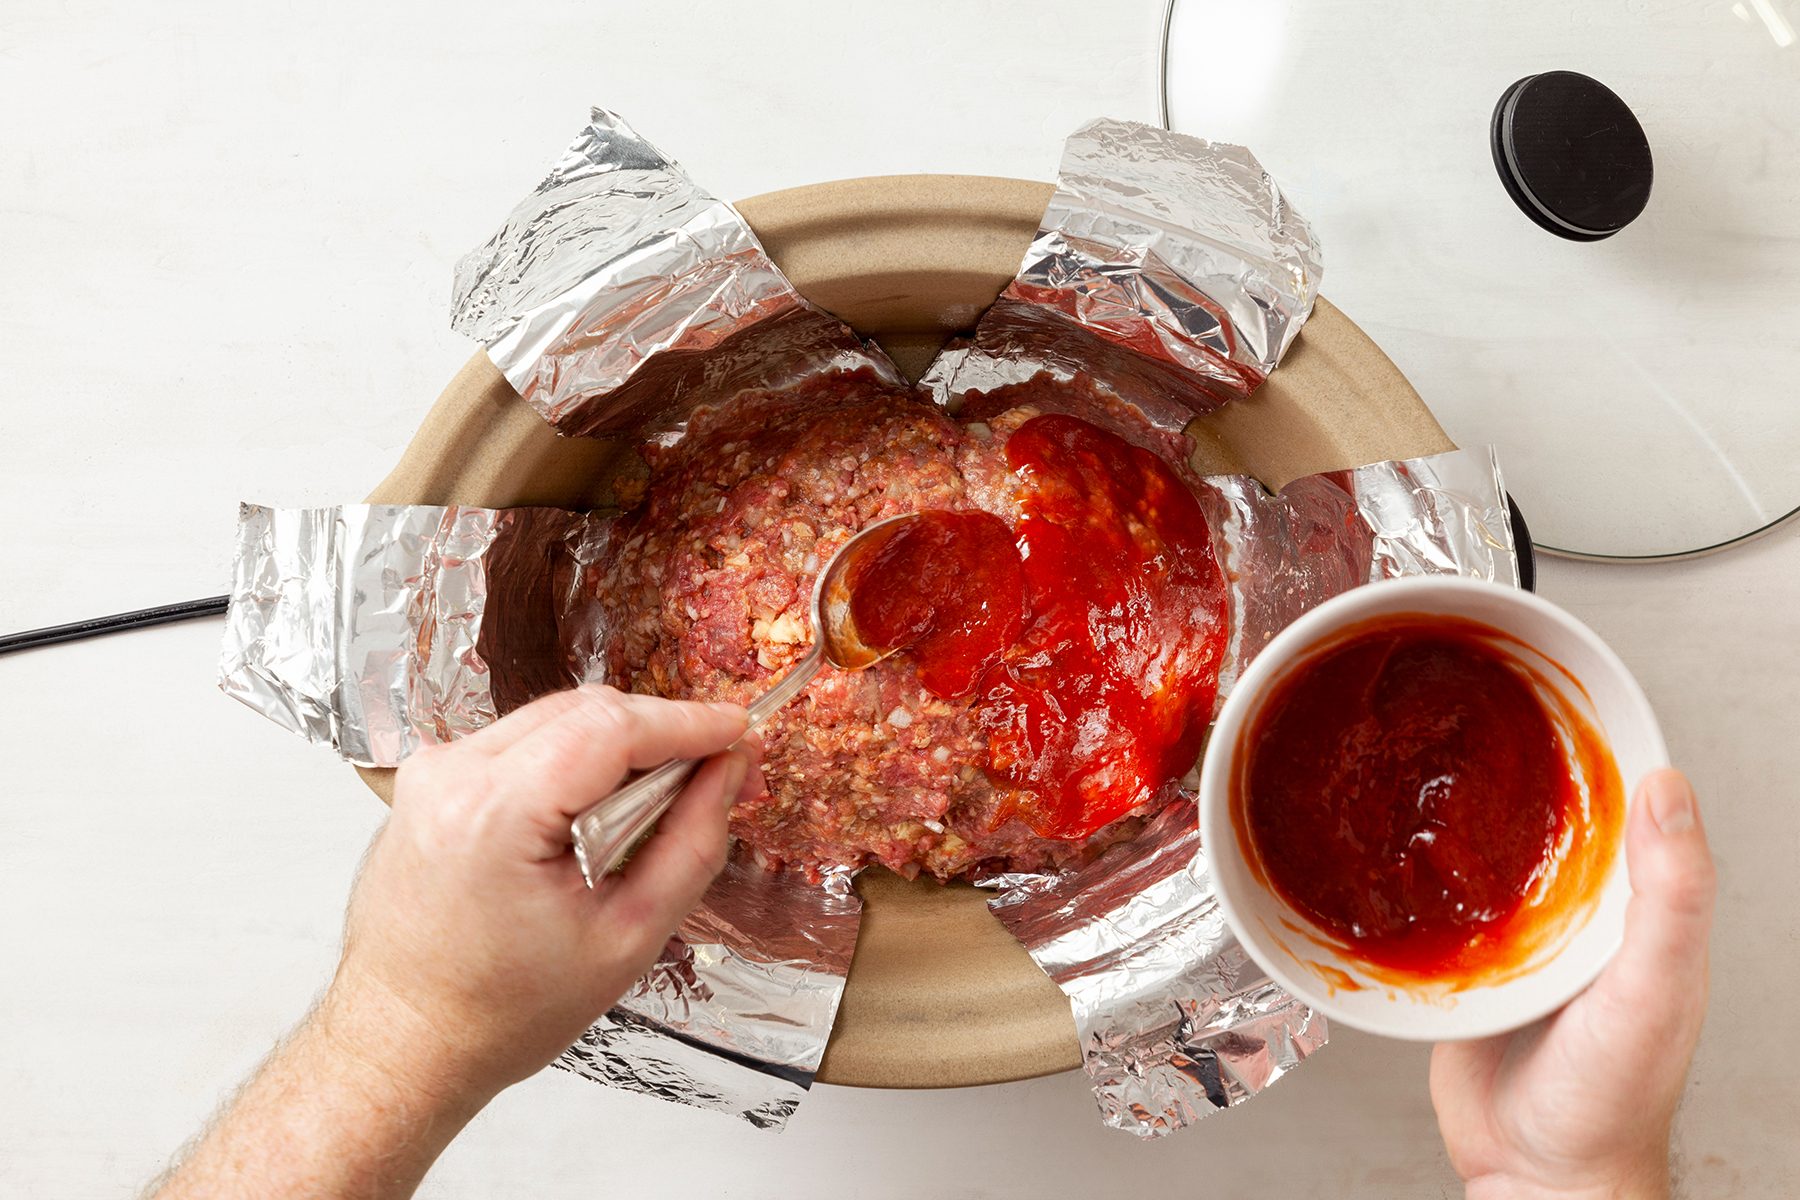 Meat Loaf From The Slow Cooker Ft23 36042 Jr 1025 4 Ss Edit